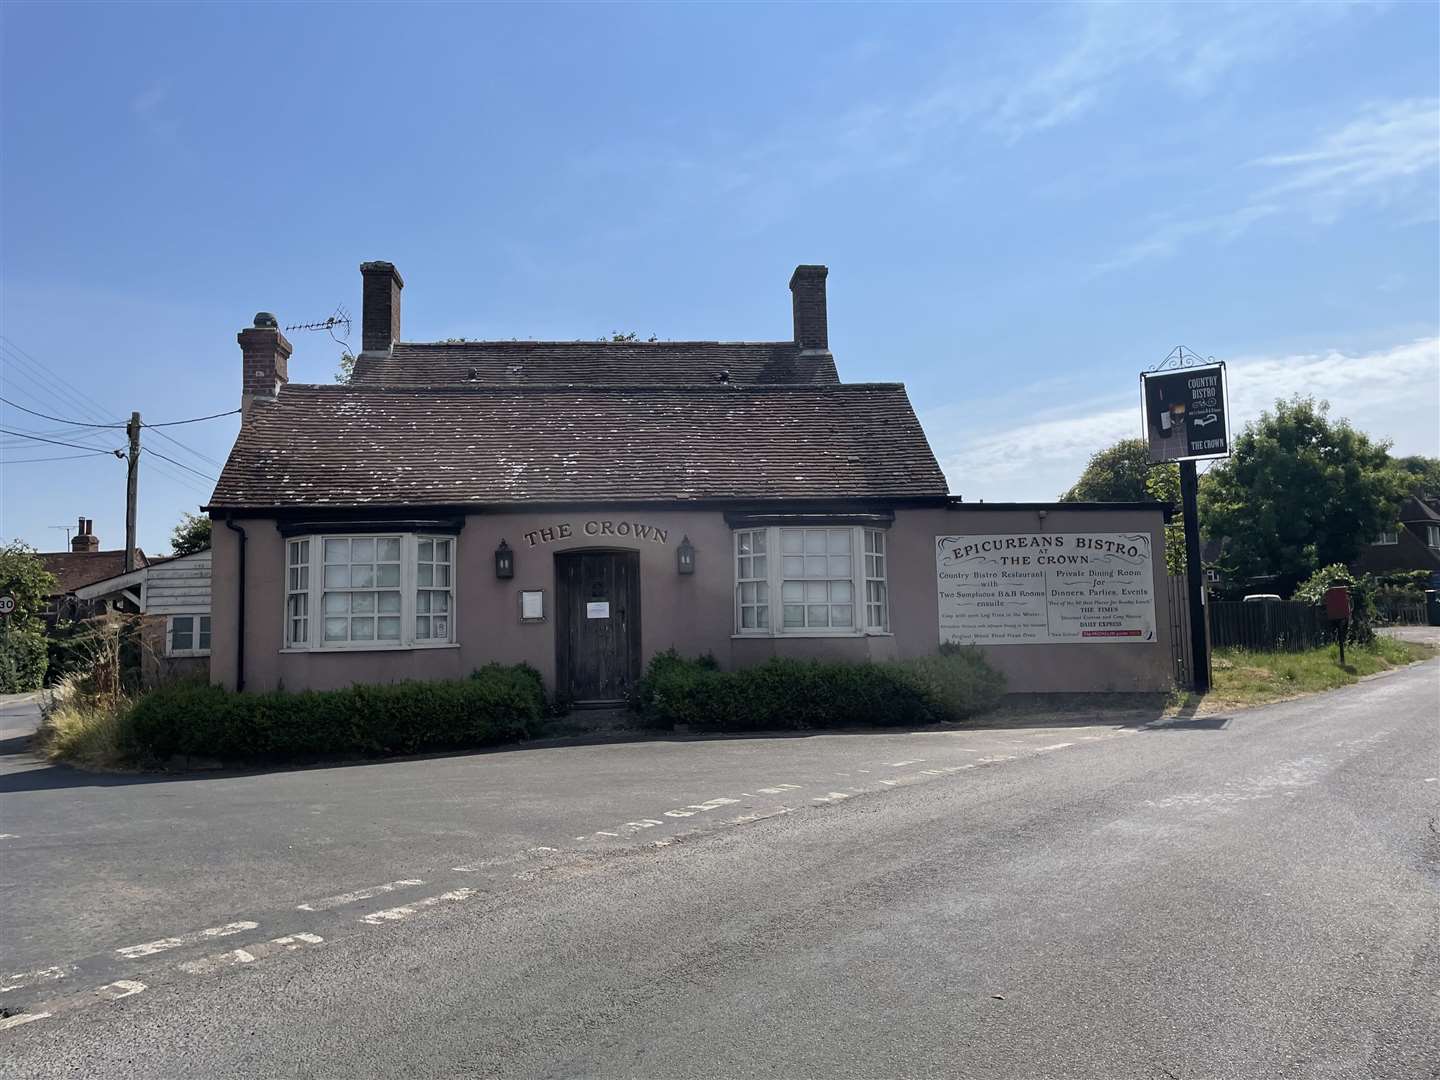 The Crown Inn, Stone in Oxney near Tenterden, could be turned into homes under new plans